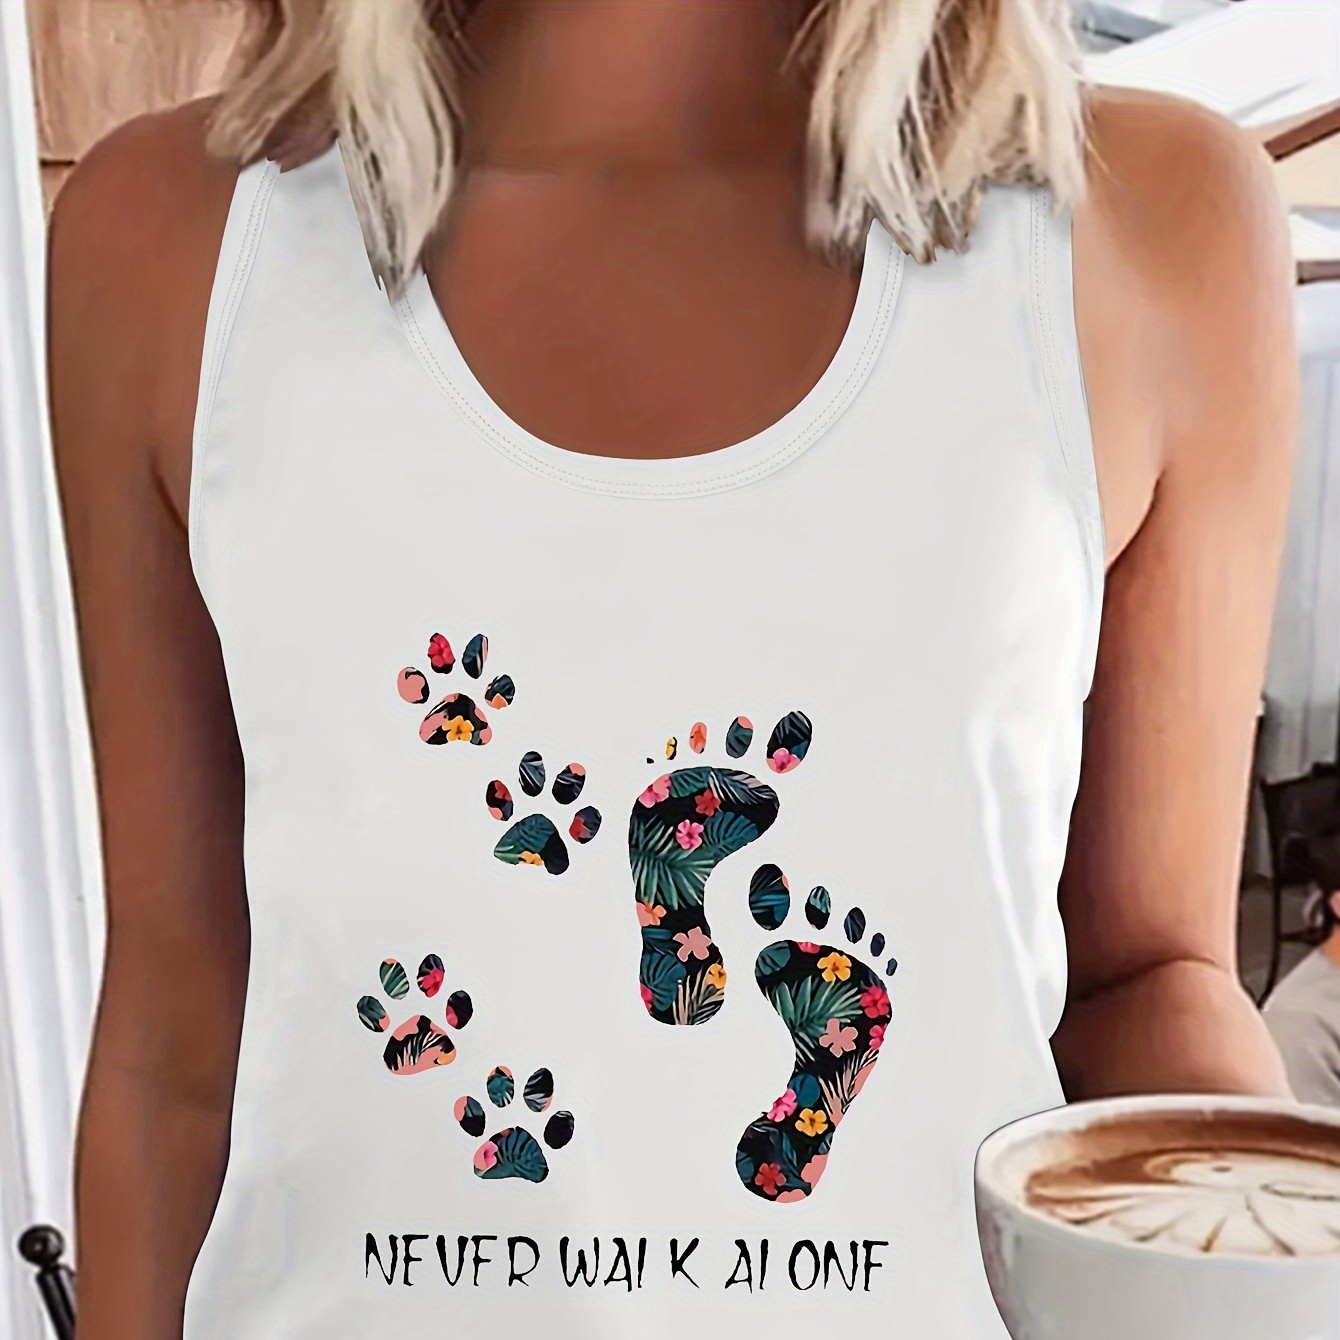 

Flower Footprint Print Tank Top, Sleeveless Crew Neck Casual Top For Summer & Spring, Women's Clothing